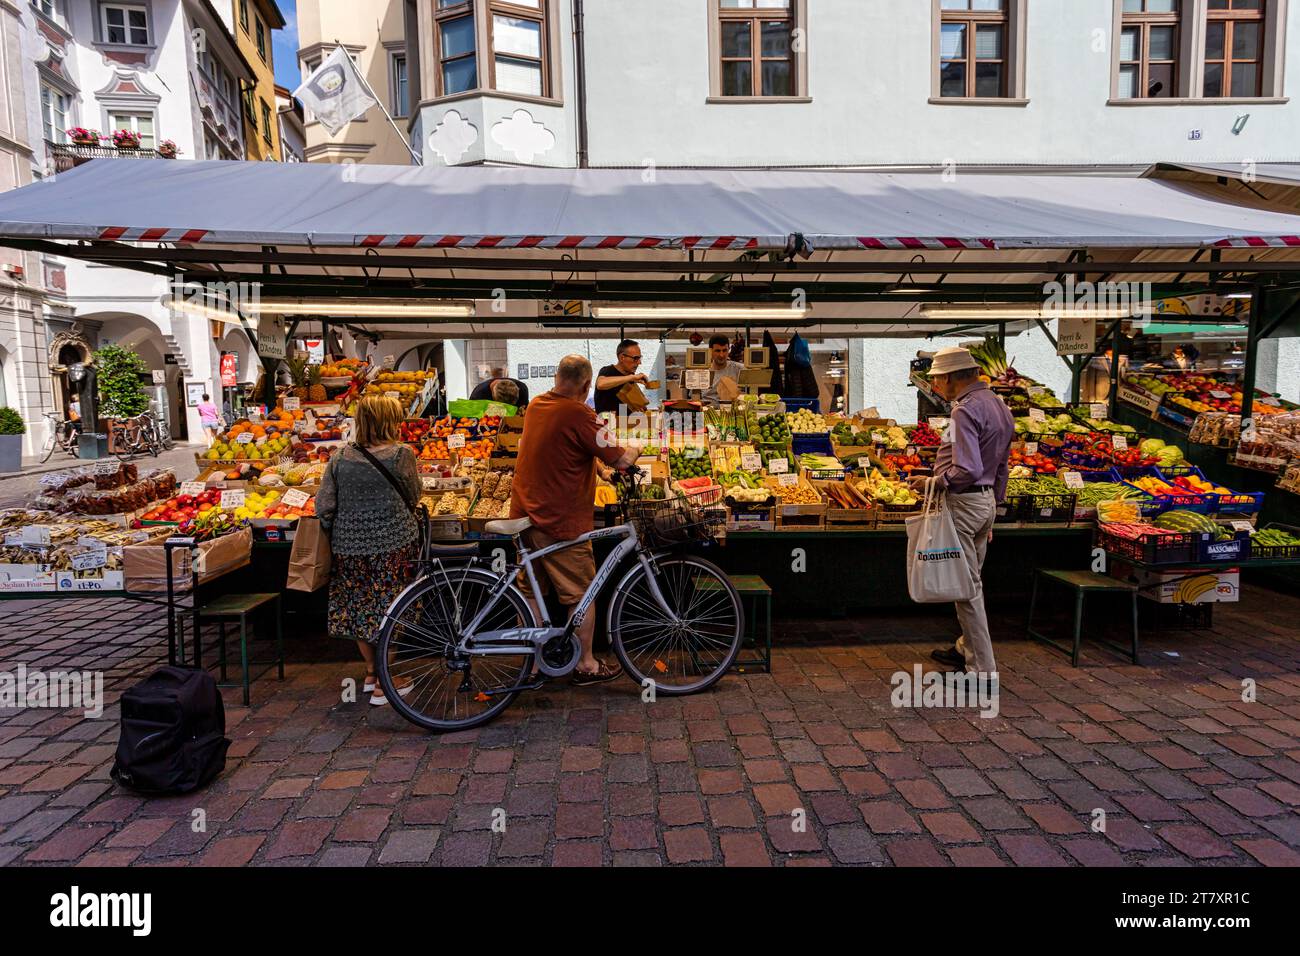 Typical food market in the old town of Bolzano (Bozen), Bozen district, Sudtirol (South Tyrol), Italy, Europe Stock Photo